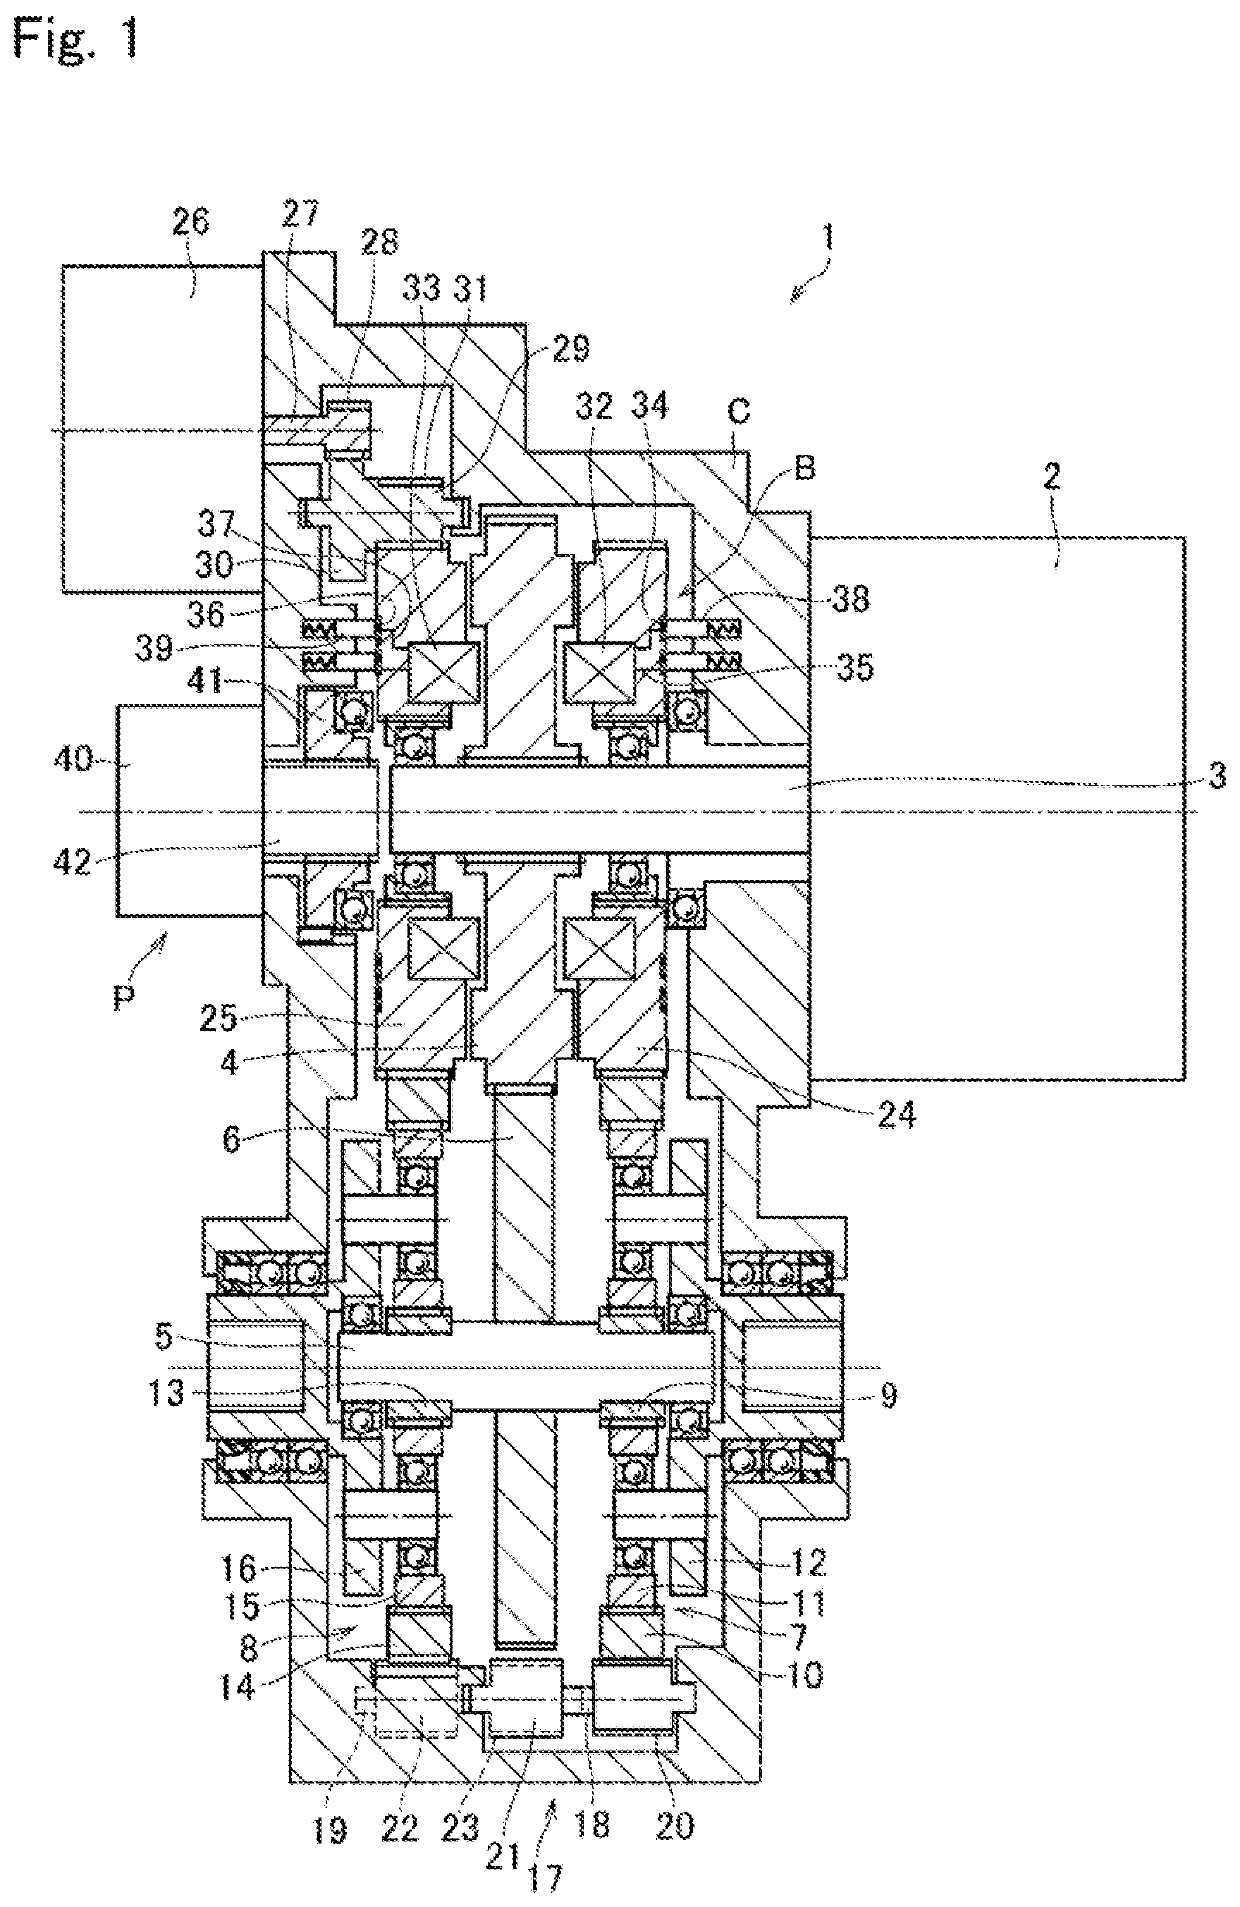 Driving force control system for vehicle